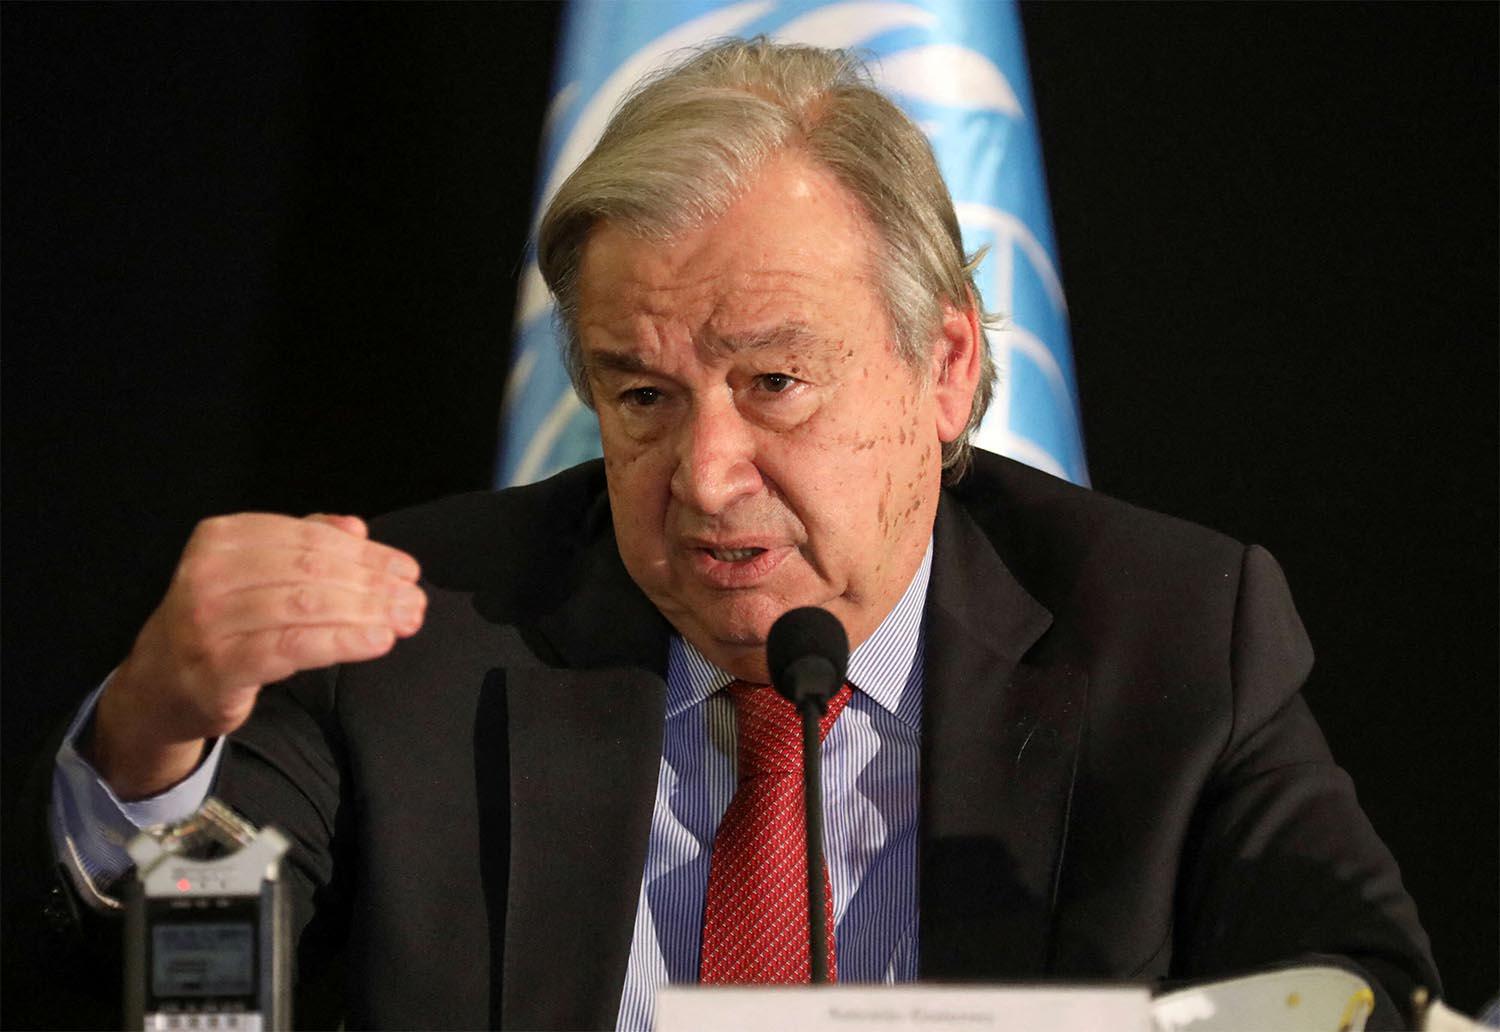 Guterres expressed “great concern” at Mali military leaders' recent announcement delaying next month’s elections until 2026